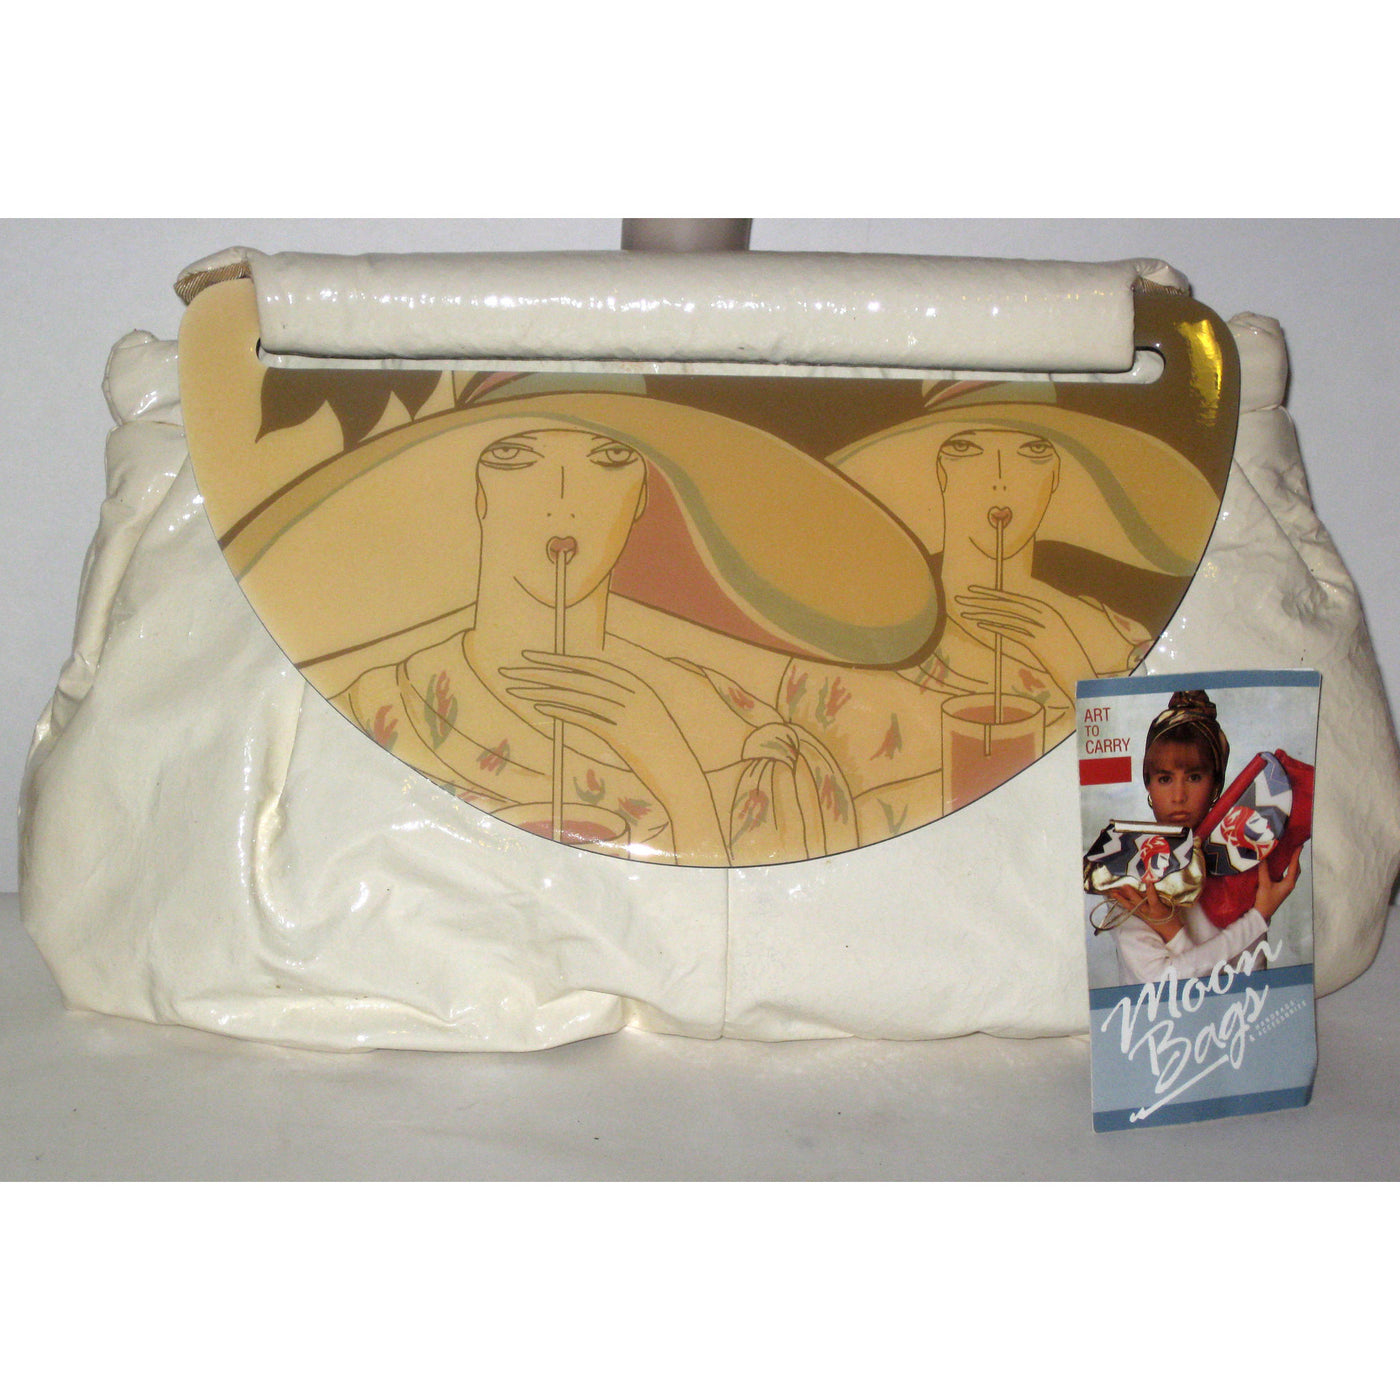 Vintage Cream High Gloss Moon Bag Purse By Patrica Smith - 1980's